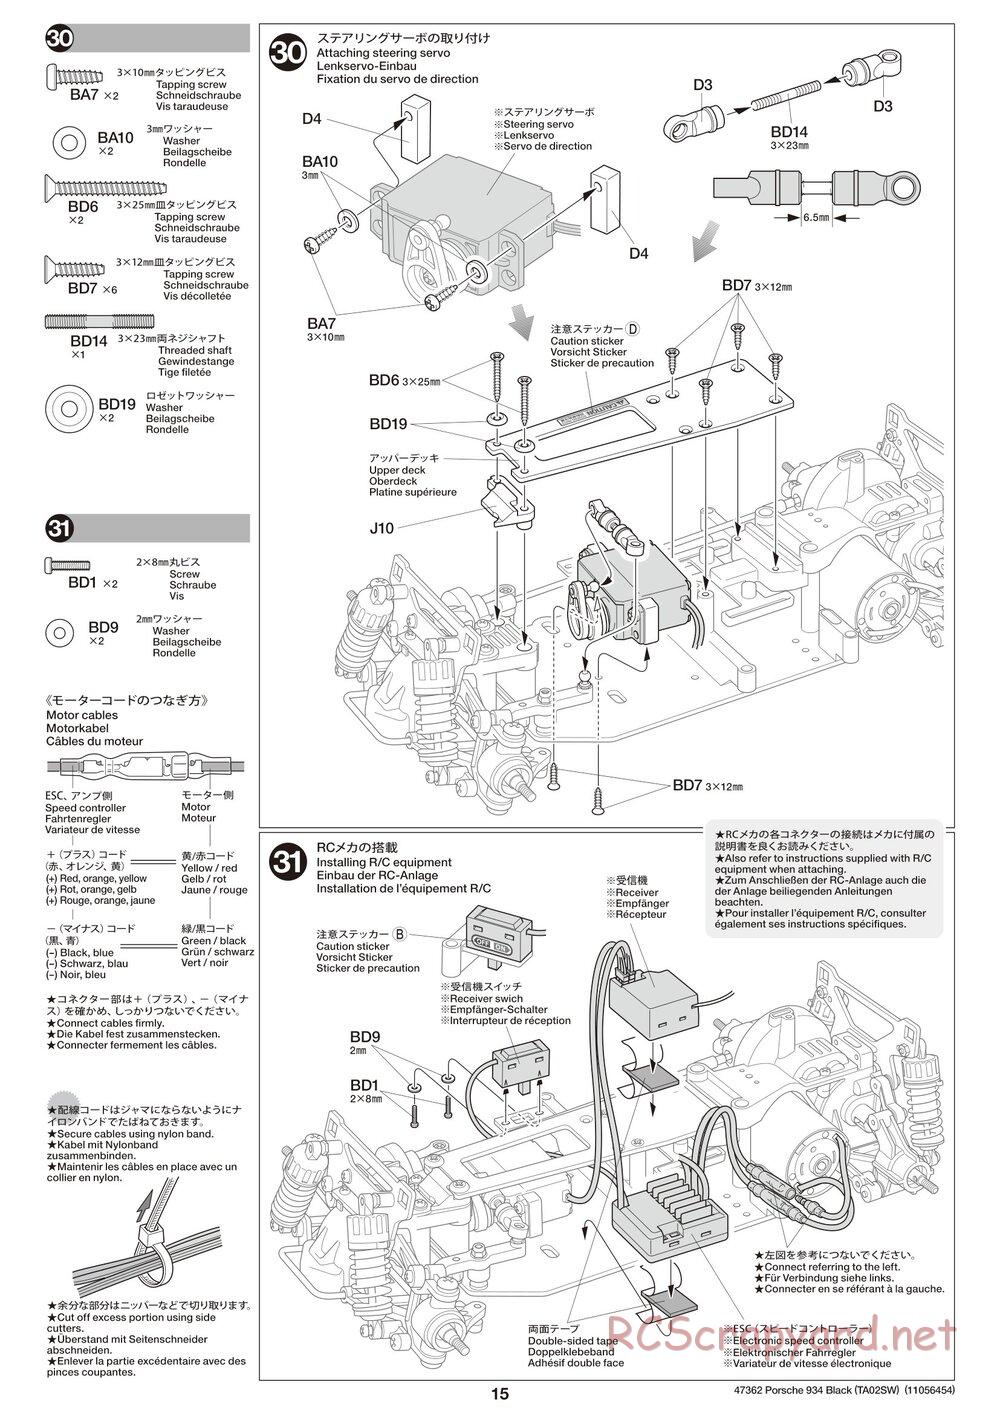 Tamiya - TT-02 White Special Chassis - Manual - Page 15